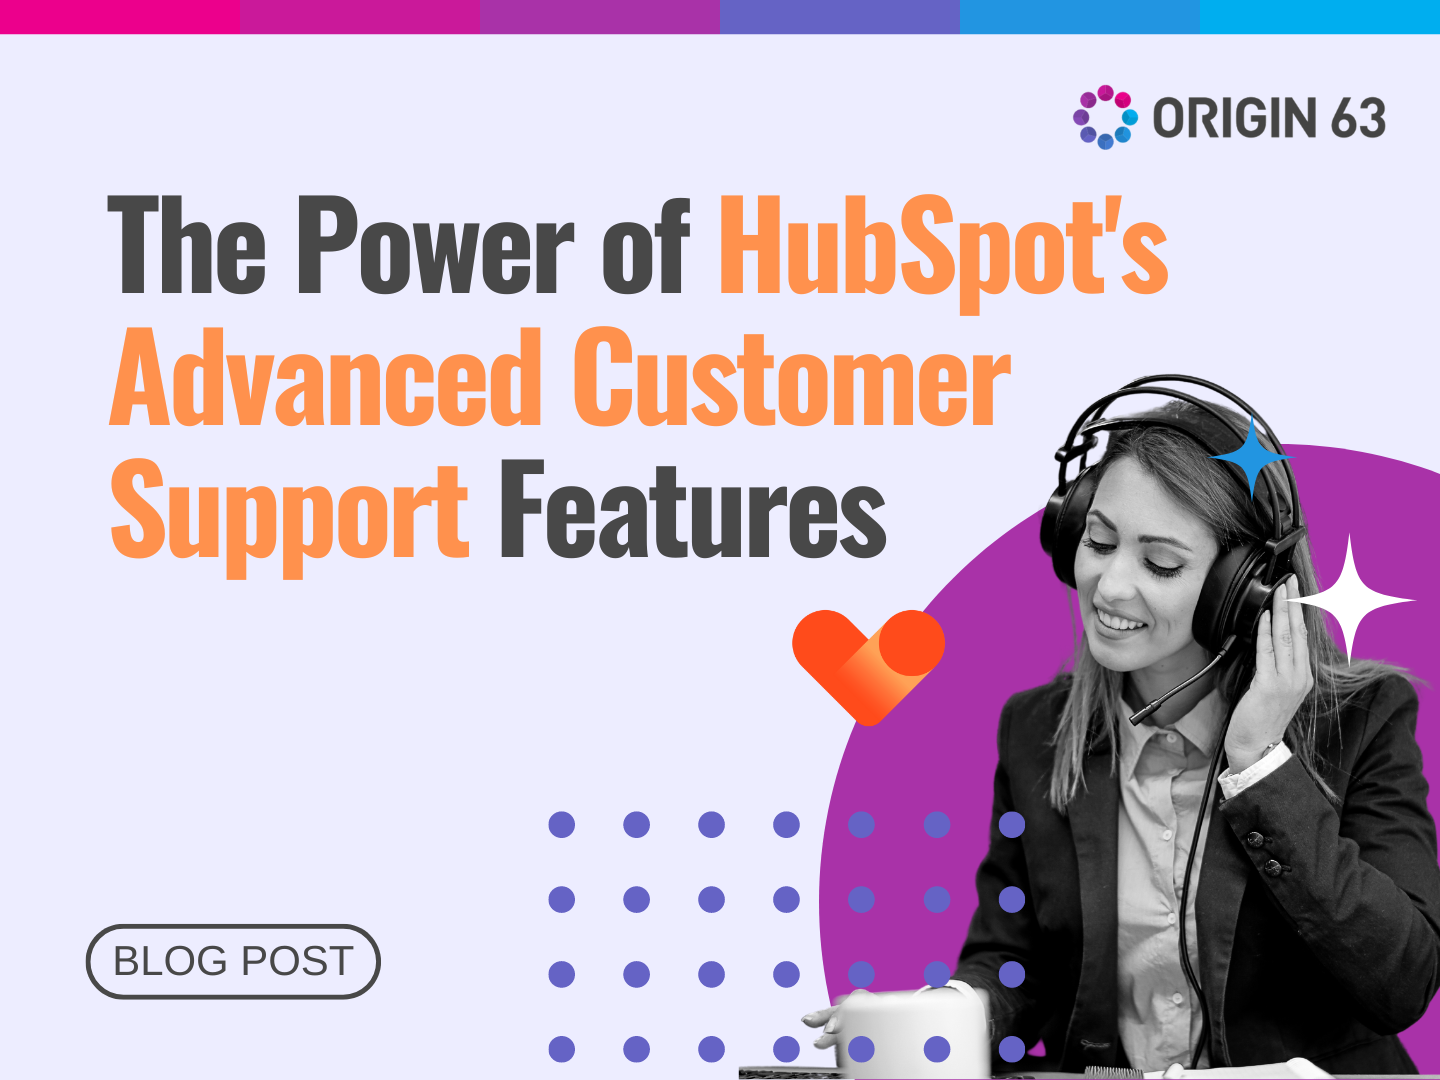 Explore HubSpot chat flows, live chat & knowledge base to elevate customer service.